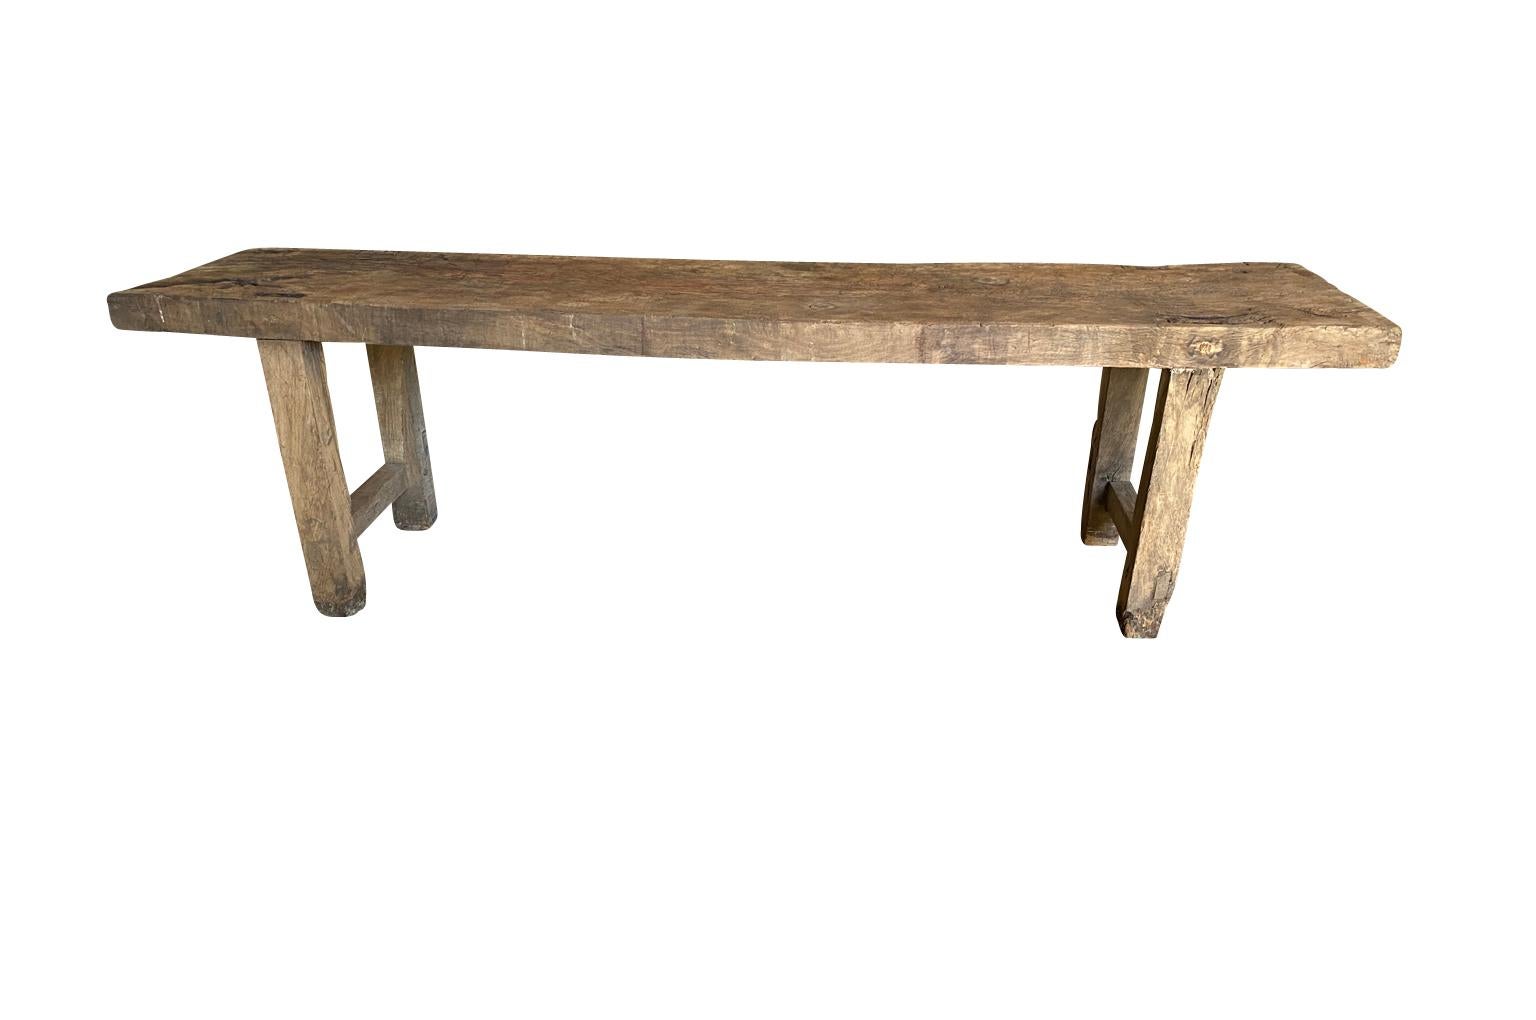 A very handsome and primitive Mid-19th Century Console - work table from the Catalan region of Spain. Soundly constructed from chestnut with a solid board top. Super patina.